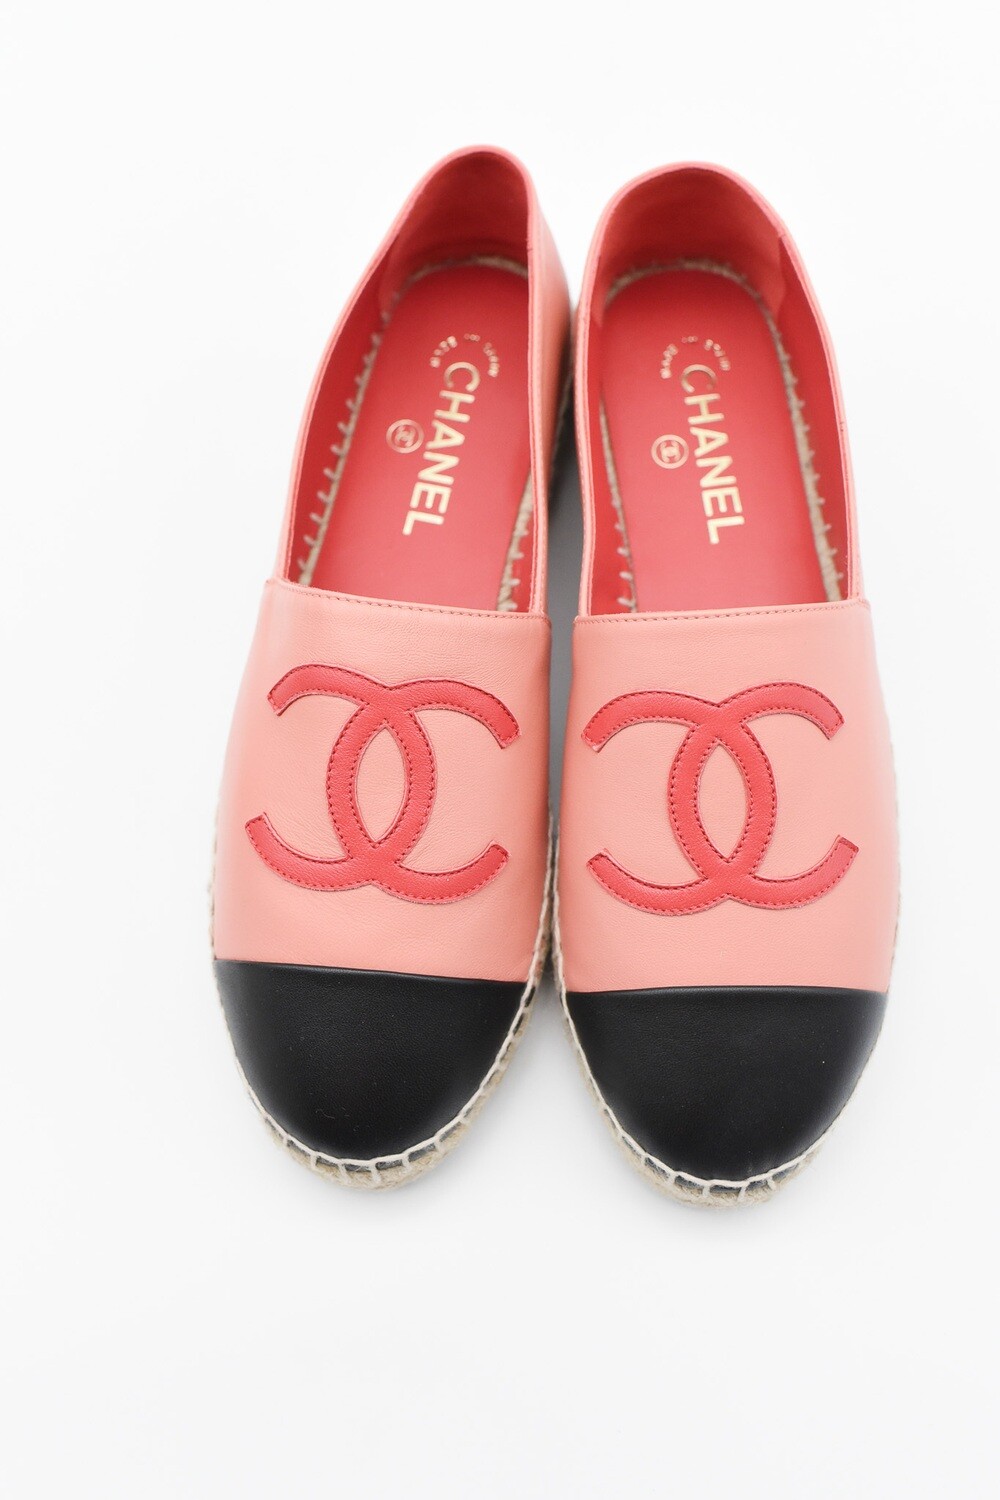 Chanel Shoes Espadrilles, Pink Leather, Size 40, New in Box GA006 - Julia  Rose Boston